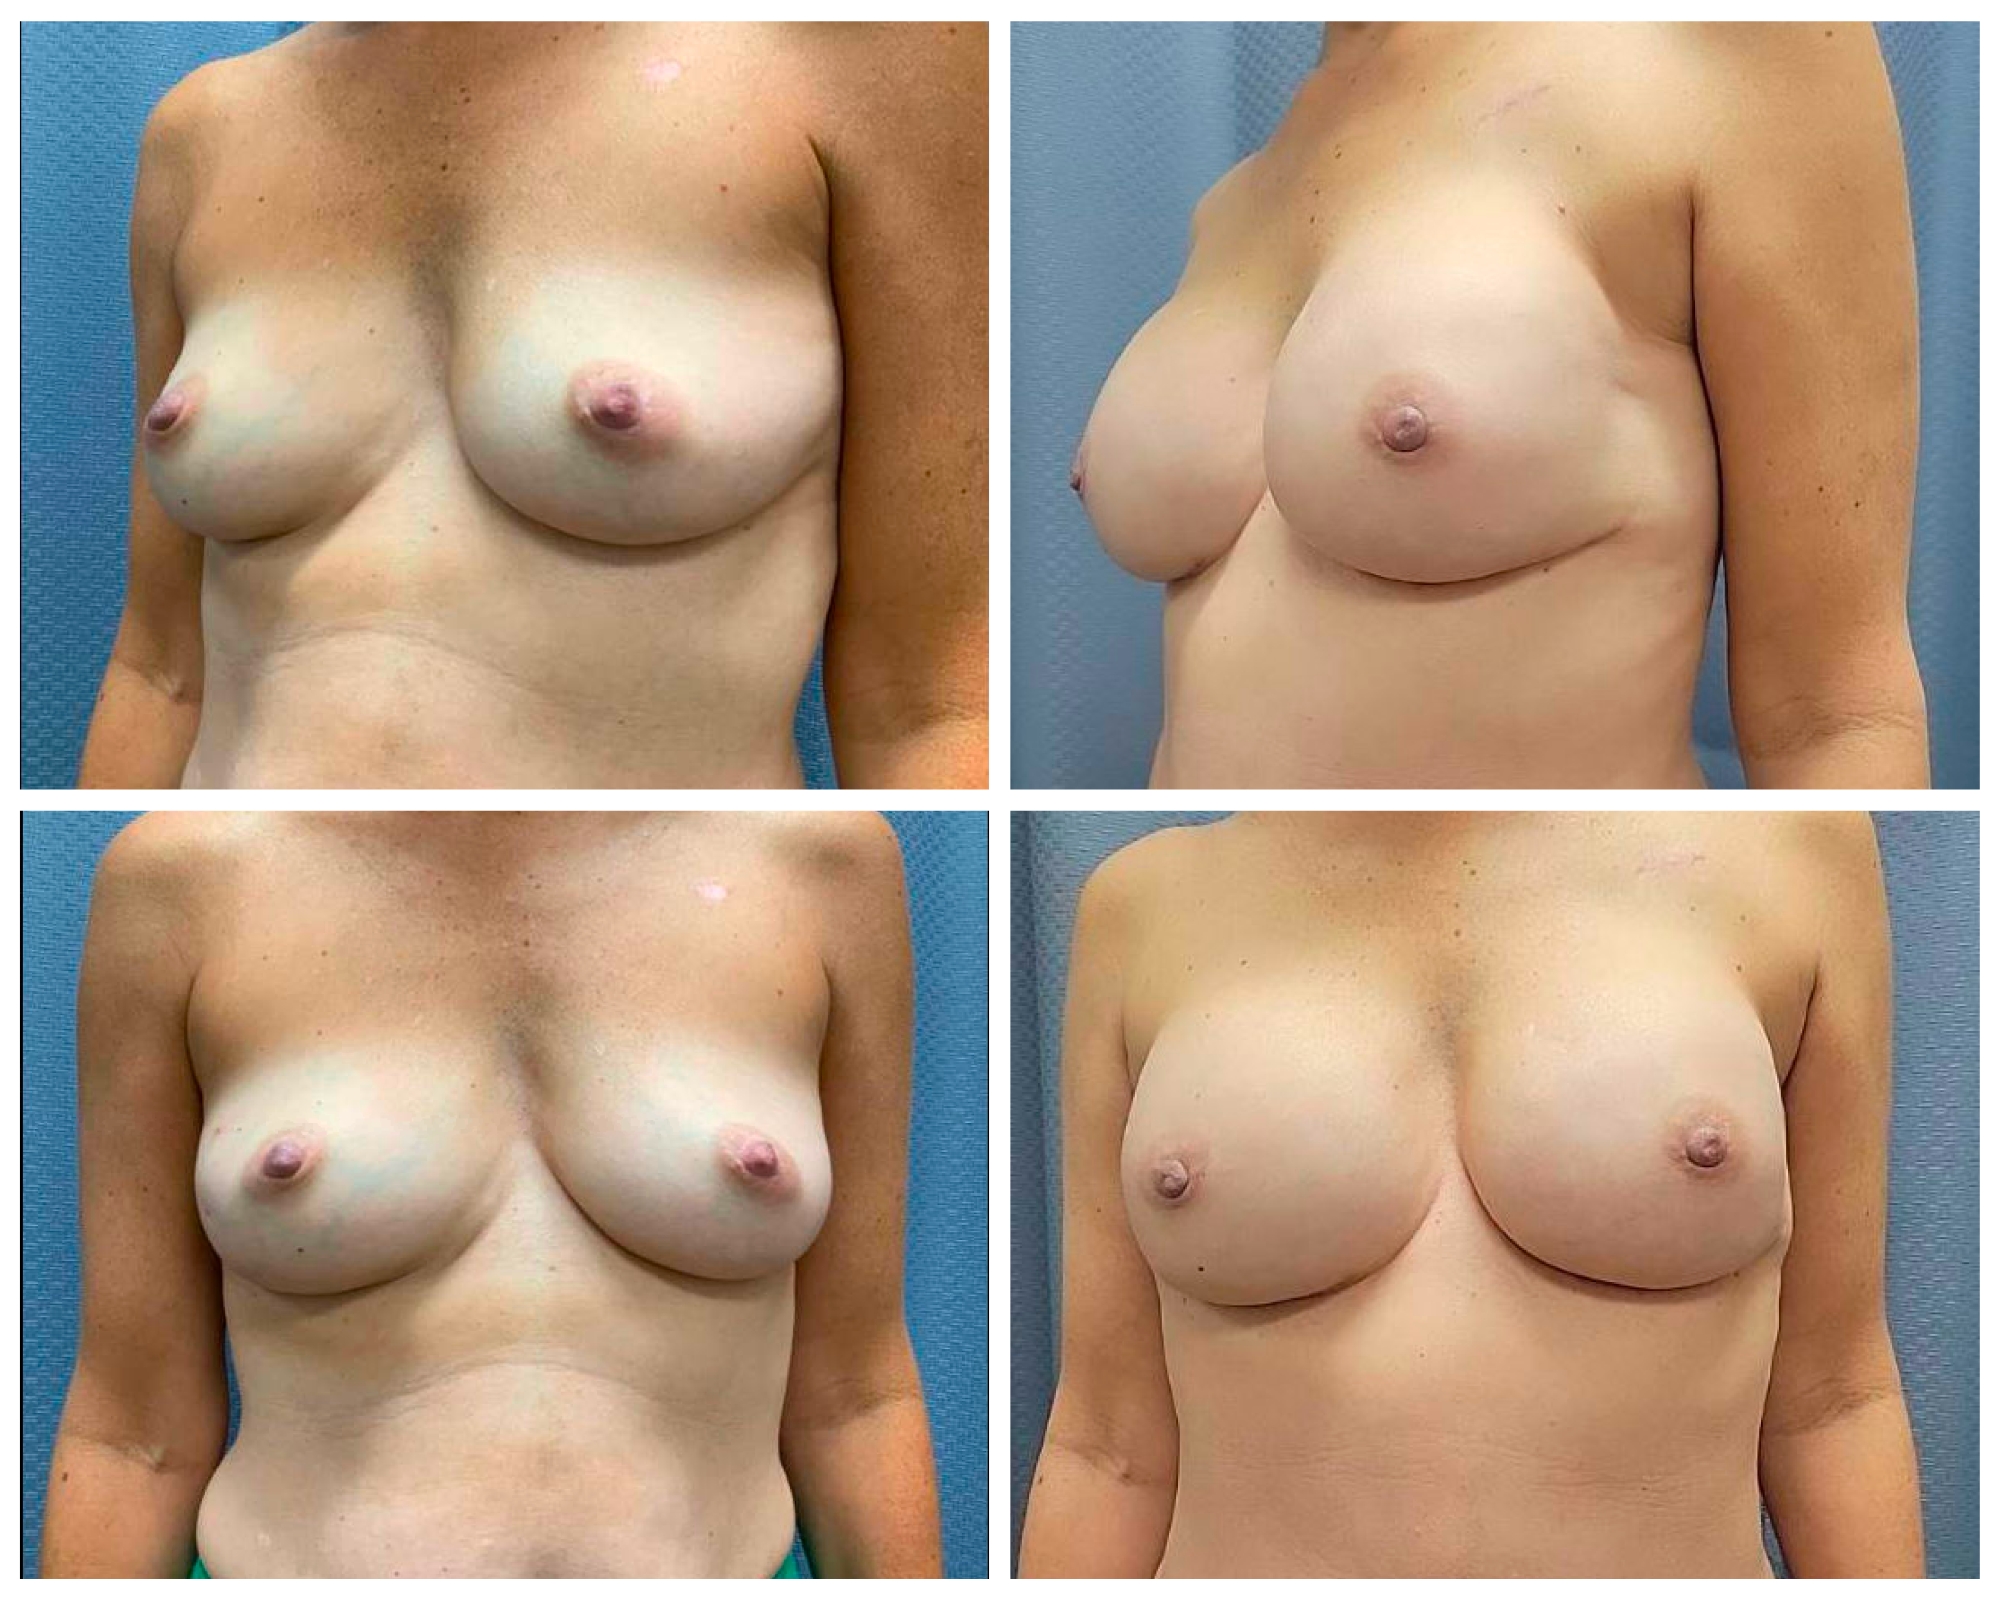 bilateral nipple sparing mastectomy for cancer with implant based reconstruction